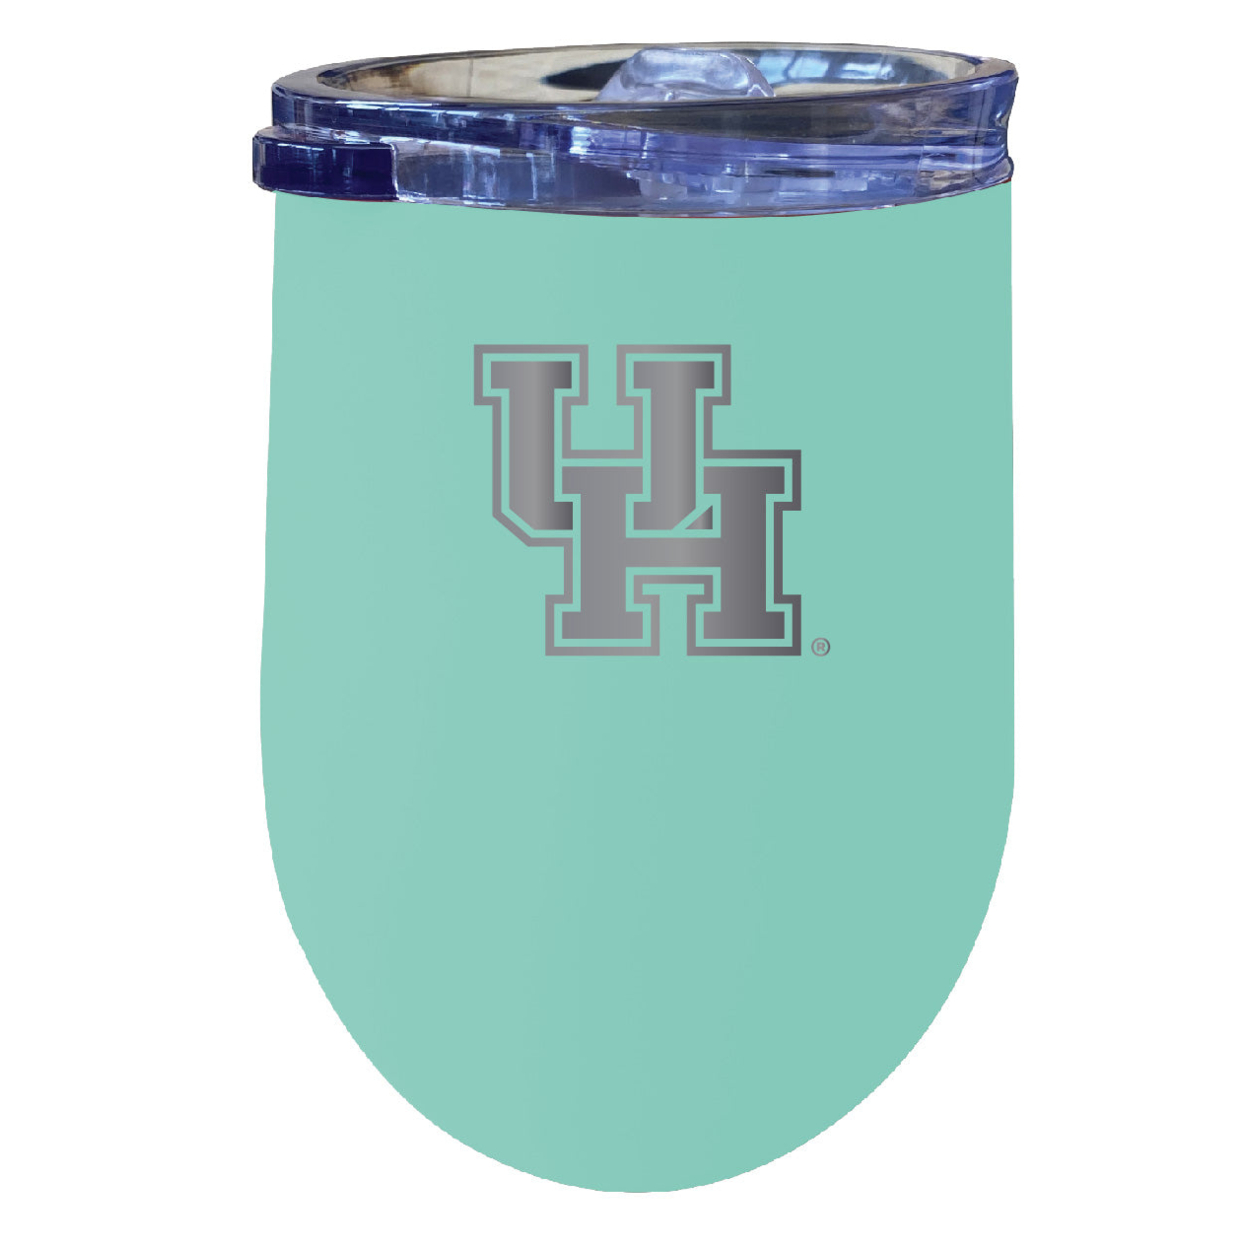 University Of Houston 12 Oz Etched Insulated Wine Stainless Steel Tumbler - Choose Your Color - Seafoam